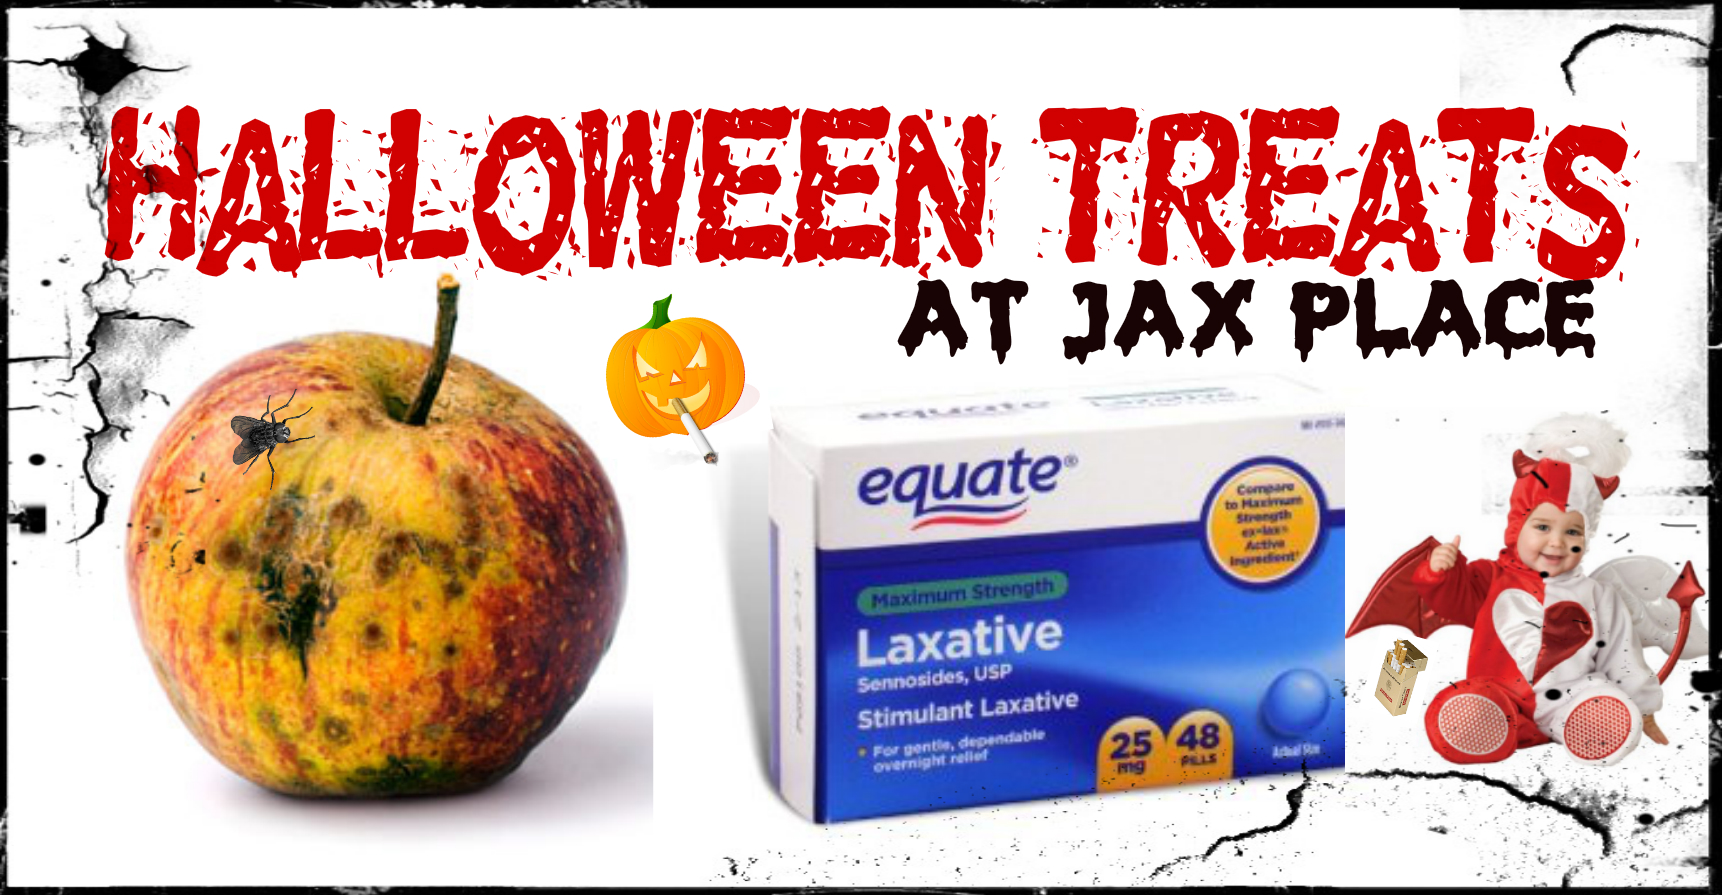 JAKS getting ready for all the local neighborhood kids, trick or treaters can expect a well done apple loaded with Equate laxative. It's a well known fact that JAK is extremely concerned with the well being of the youth in his neighborhood.